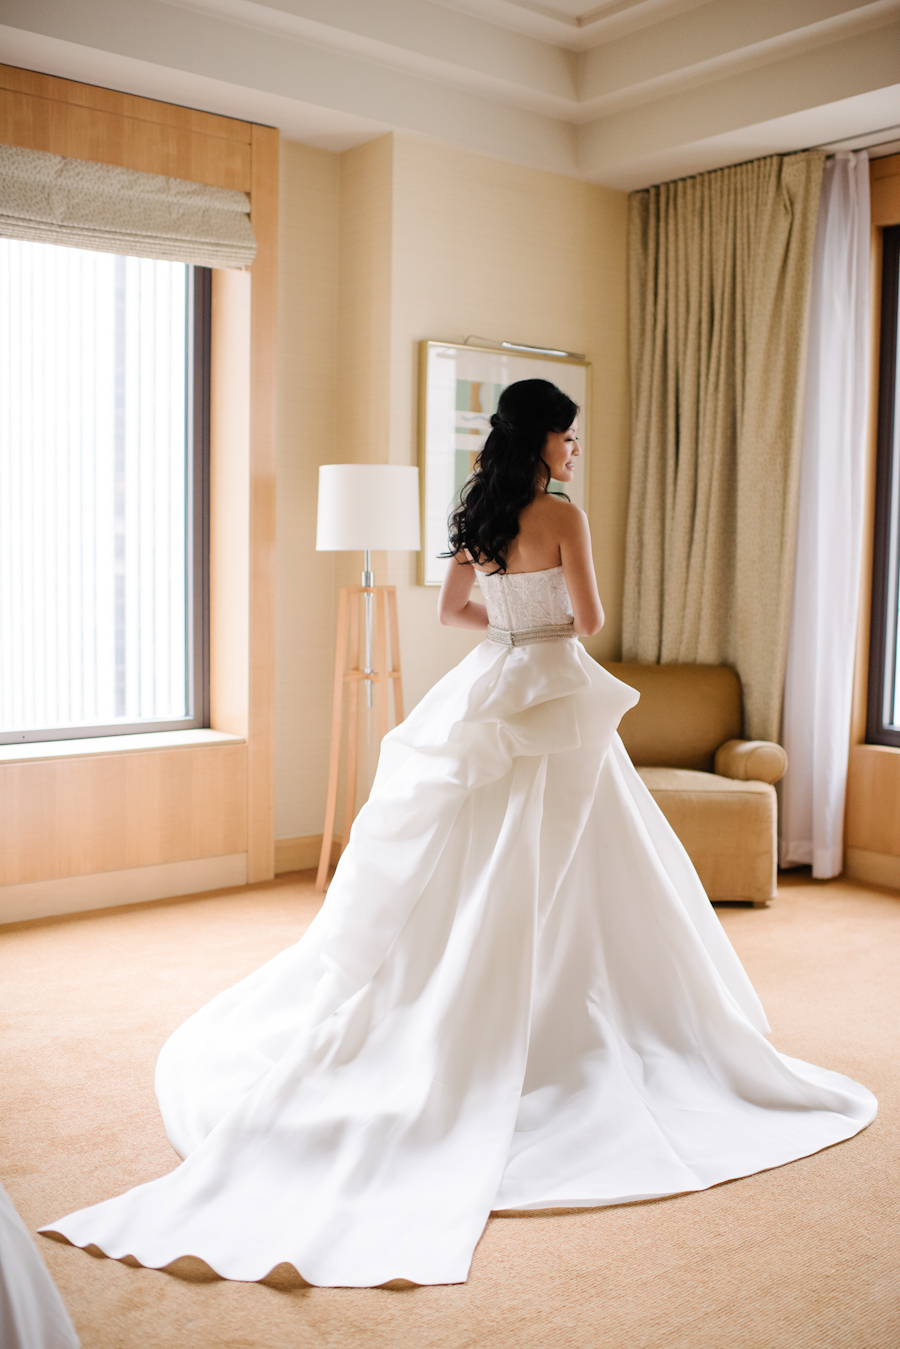 four seasons hotel wedding ang weddings and events brian hatton photography-6.jpg